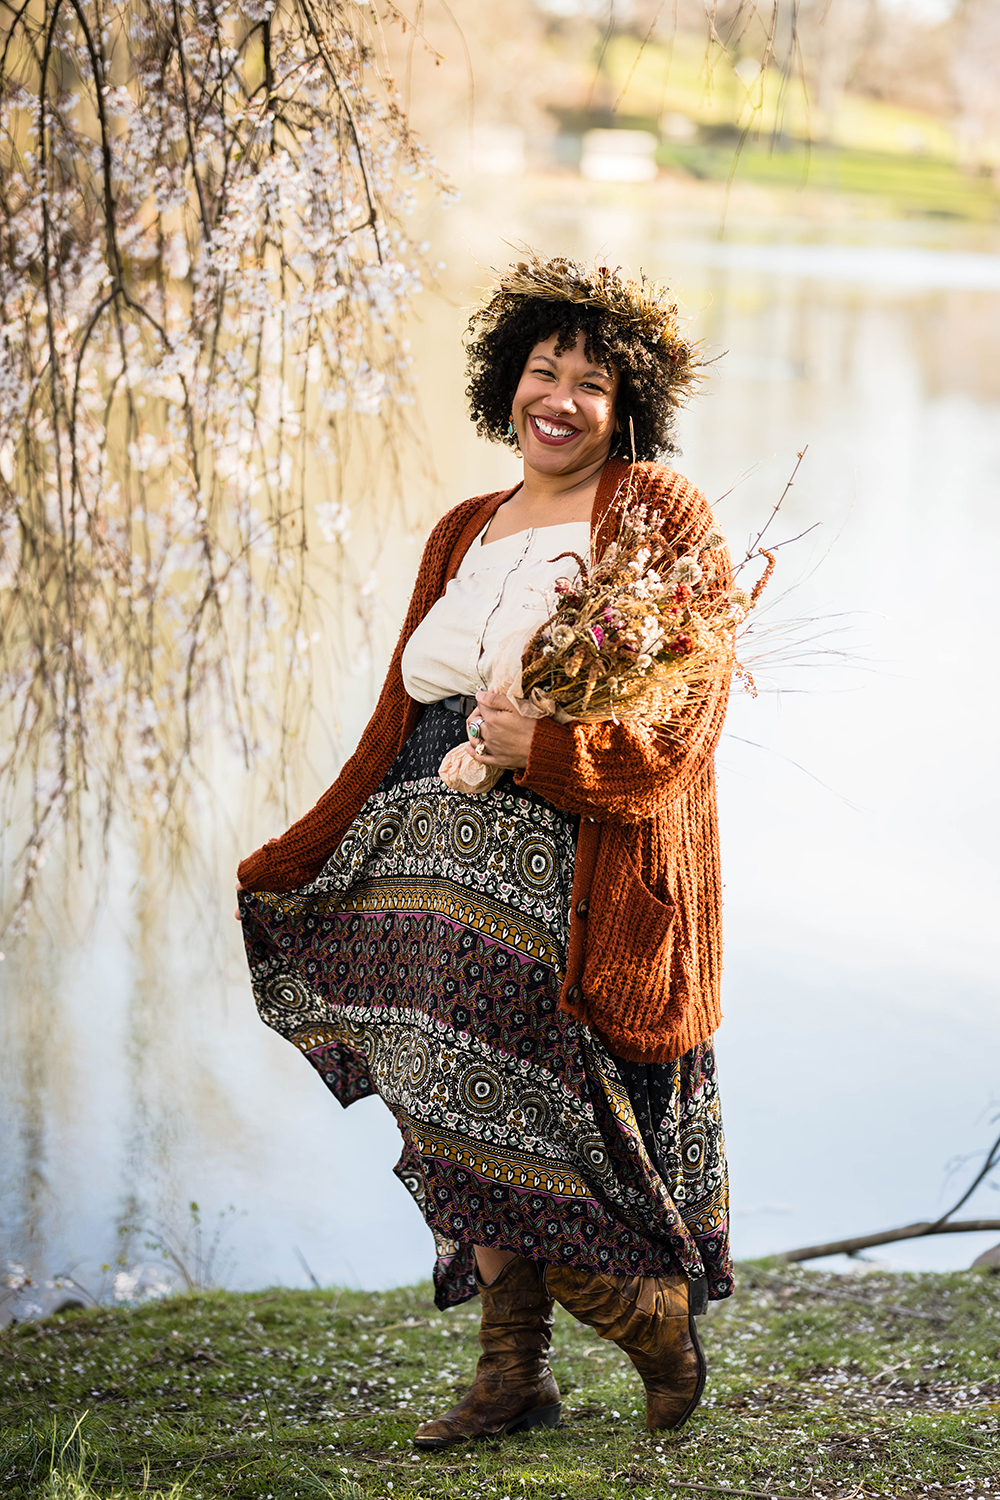 An LGBTQ+ BIPOC person wearing a dried flower crown holds a dried flower bouquet as they pose for a photo in front of a willow tree.